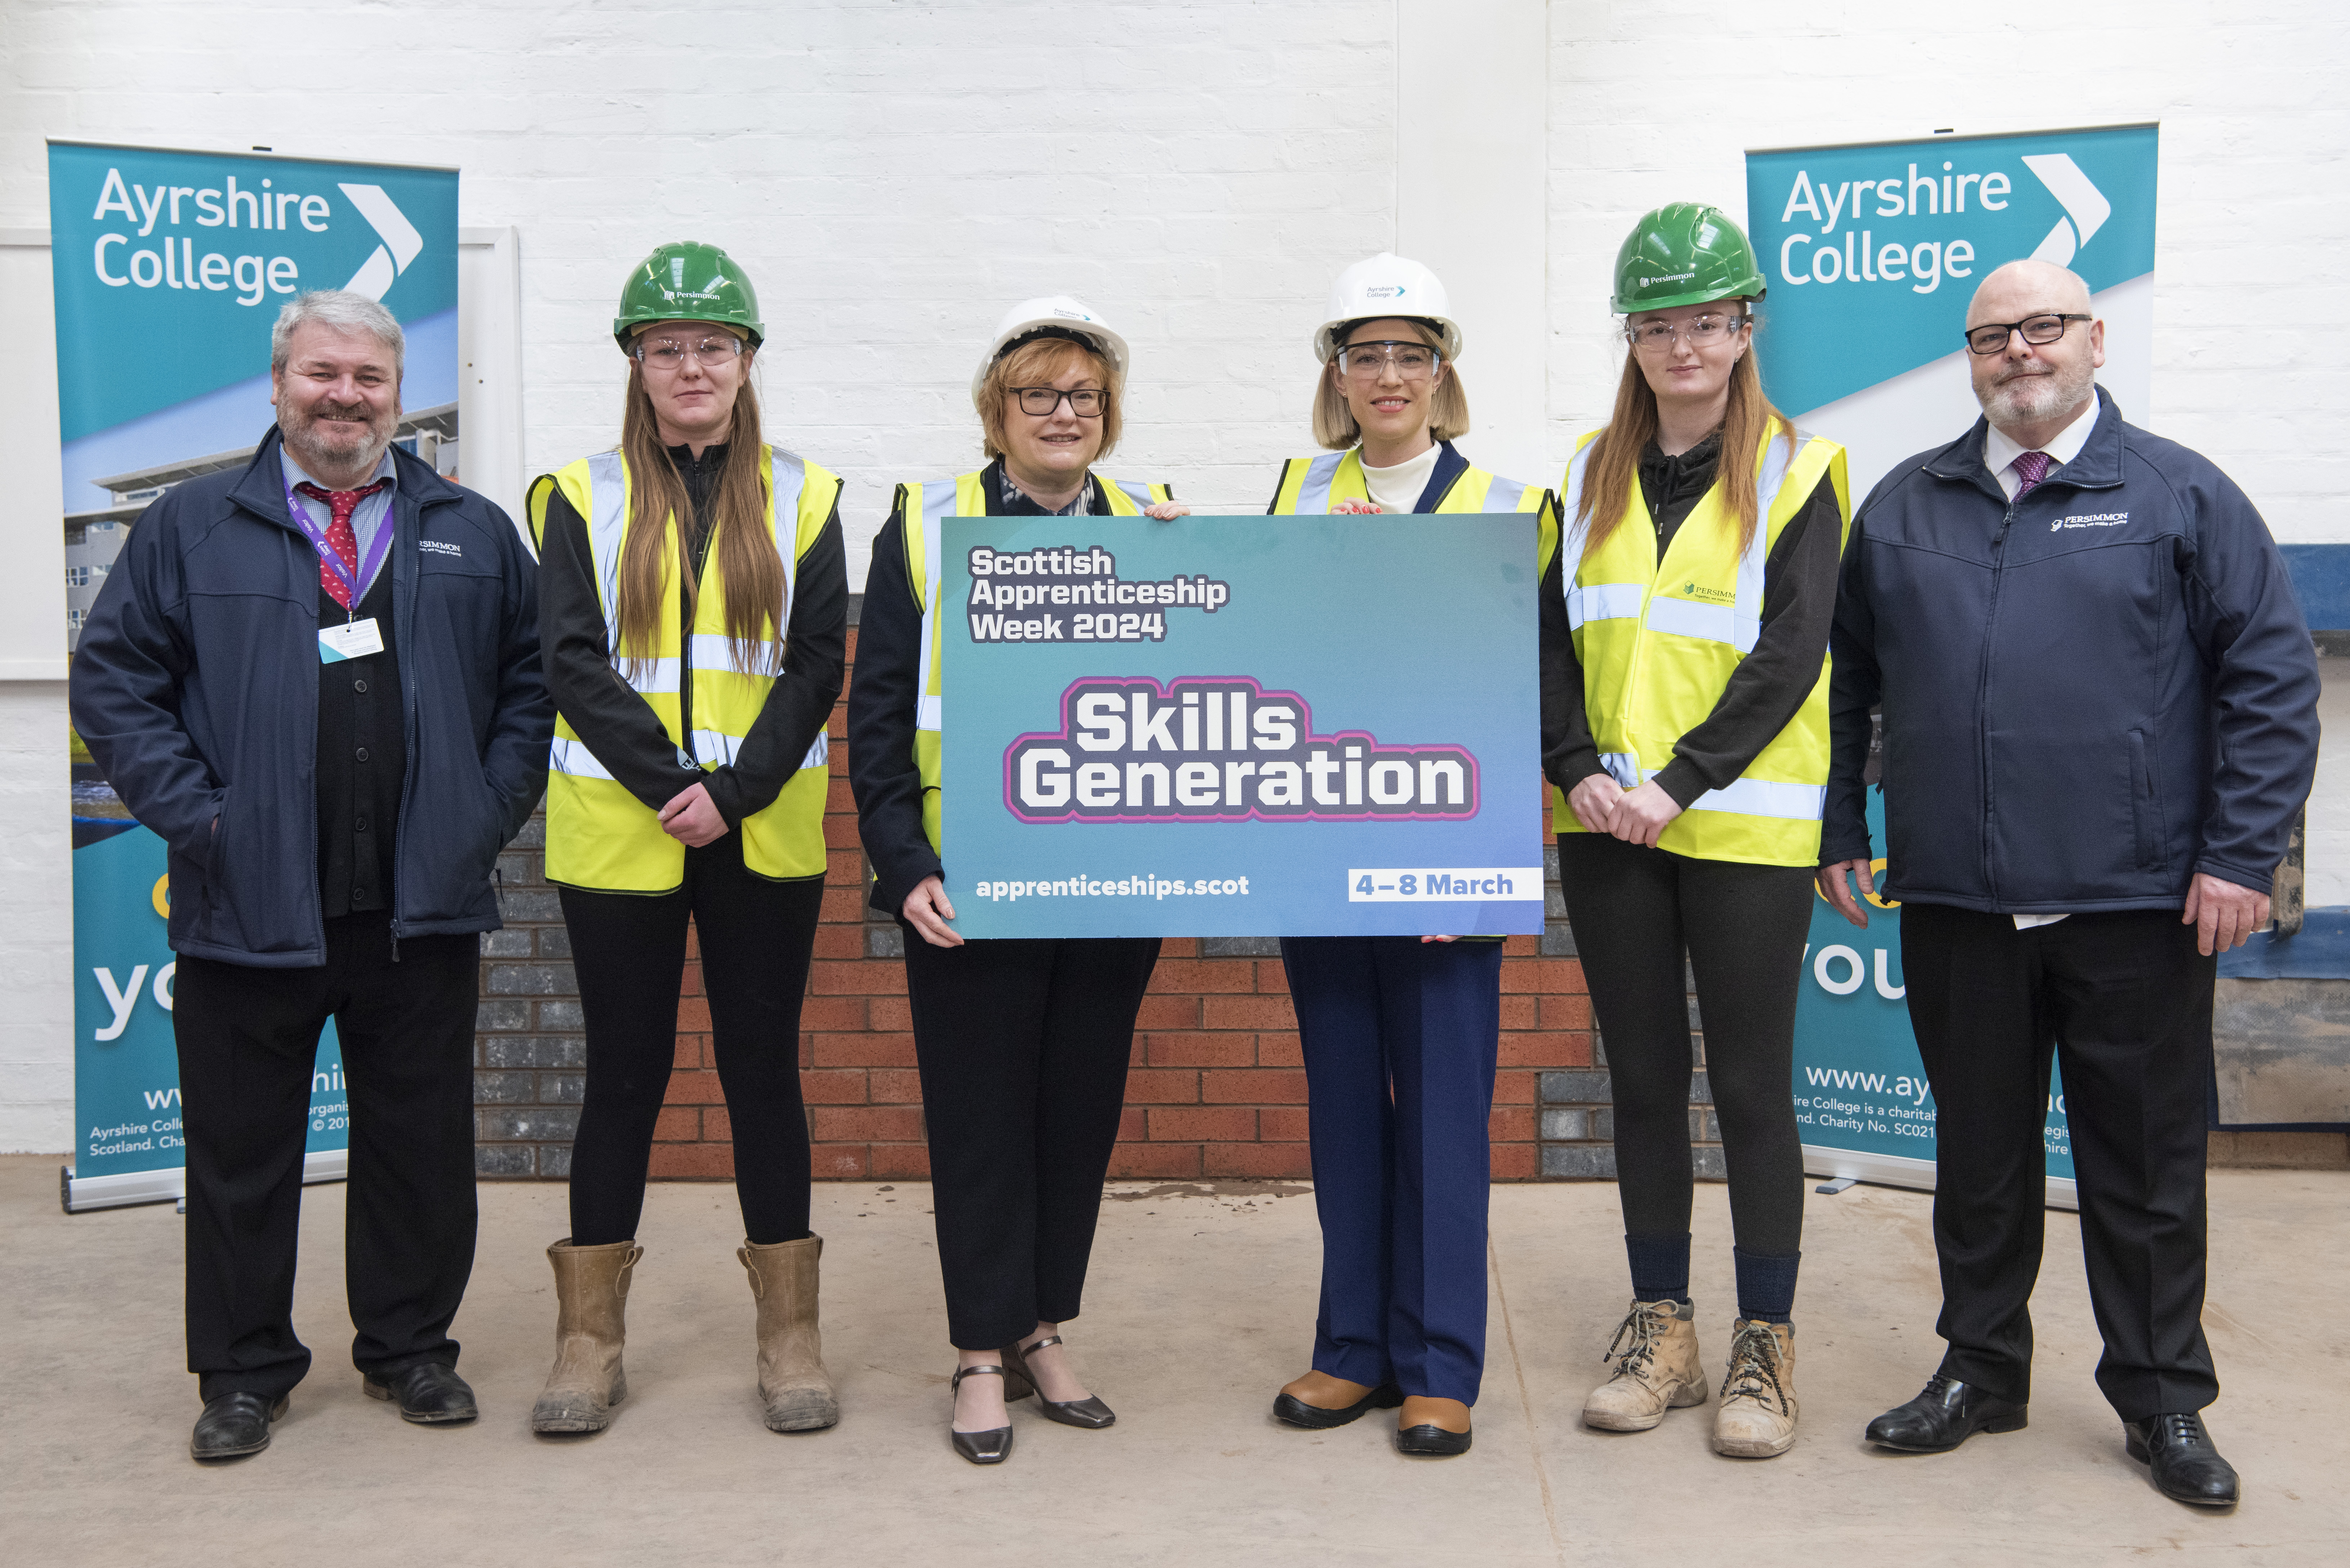 Minister makes special visit to see Ayrshire College apprentices build for the future 